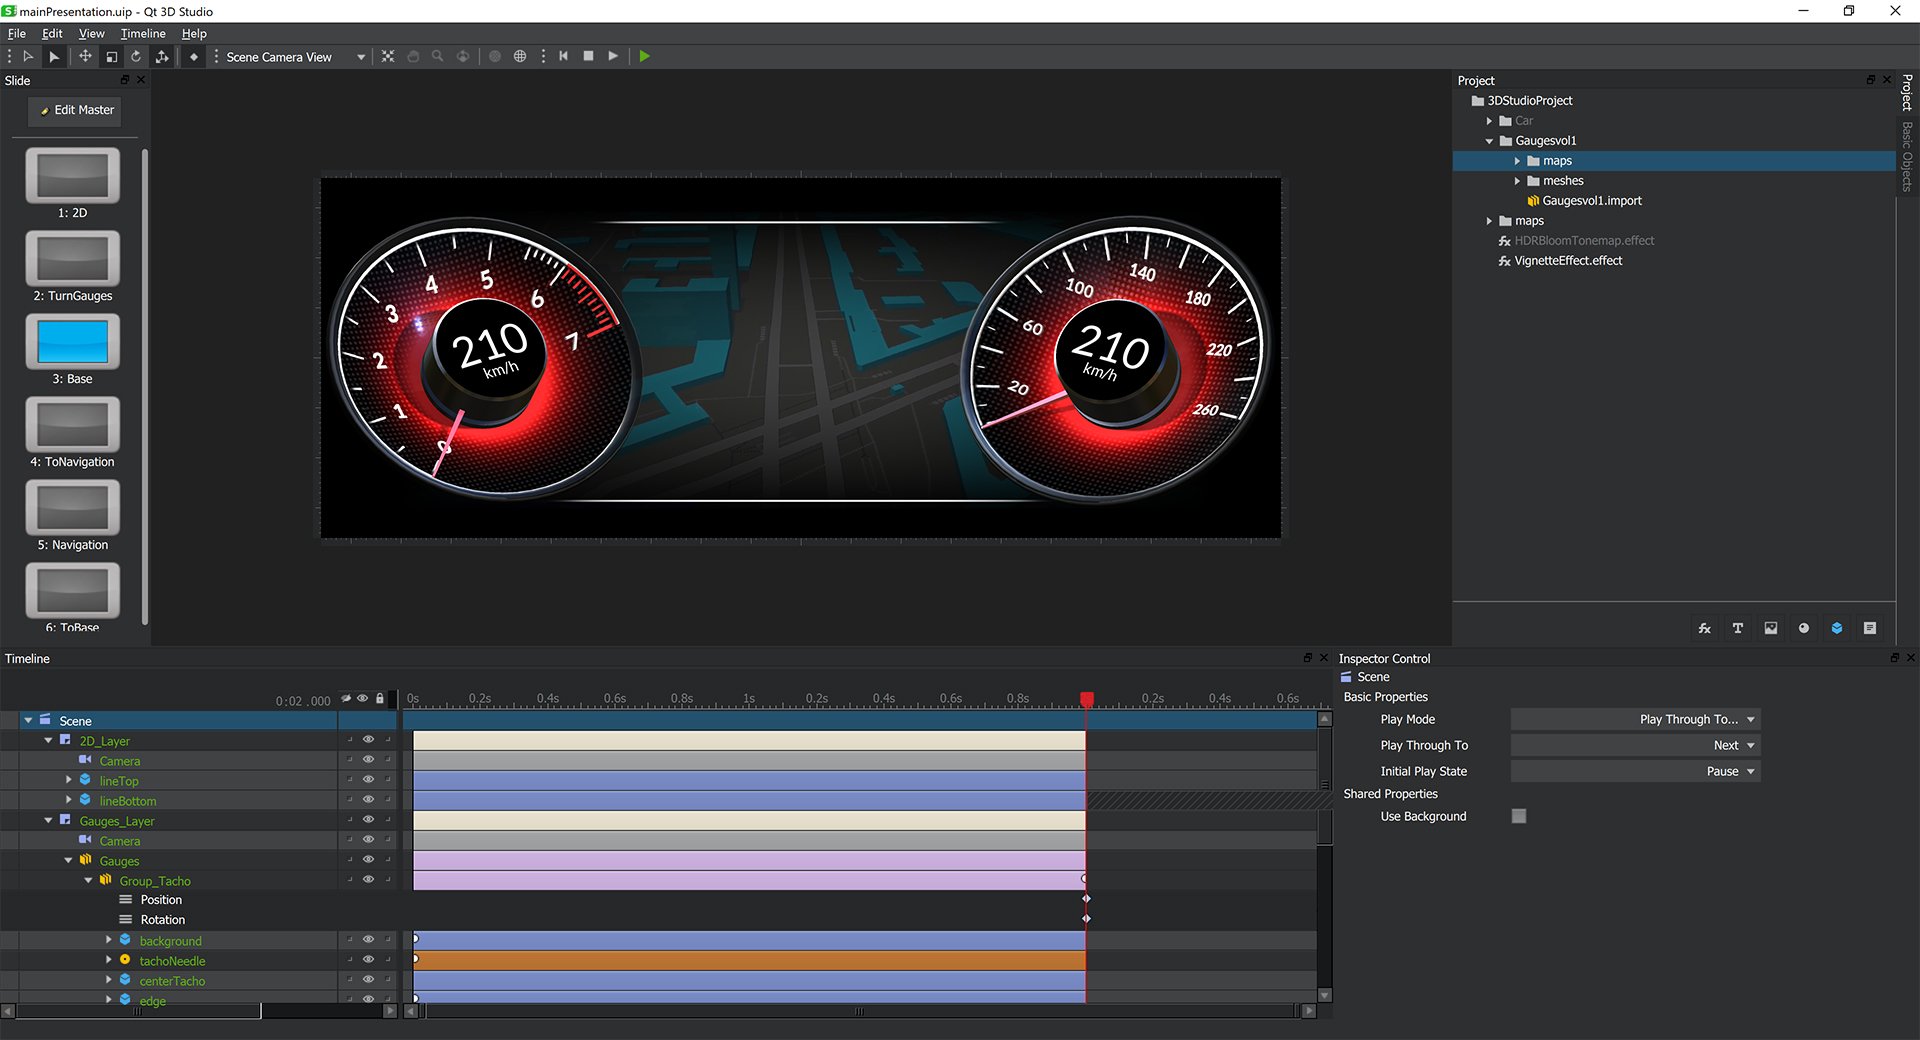 Real-time 3D User interfaces can be easily created with Qt 3D Studio